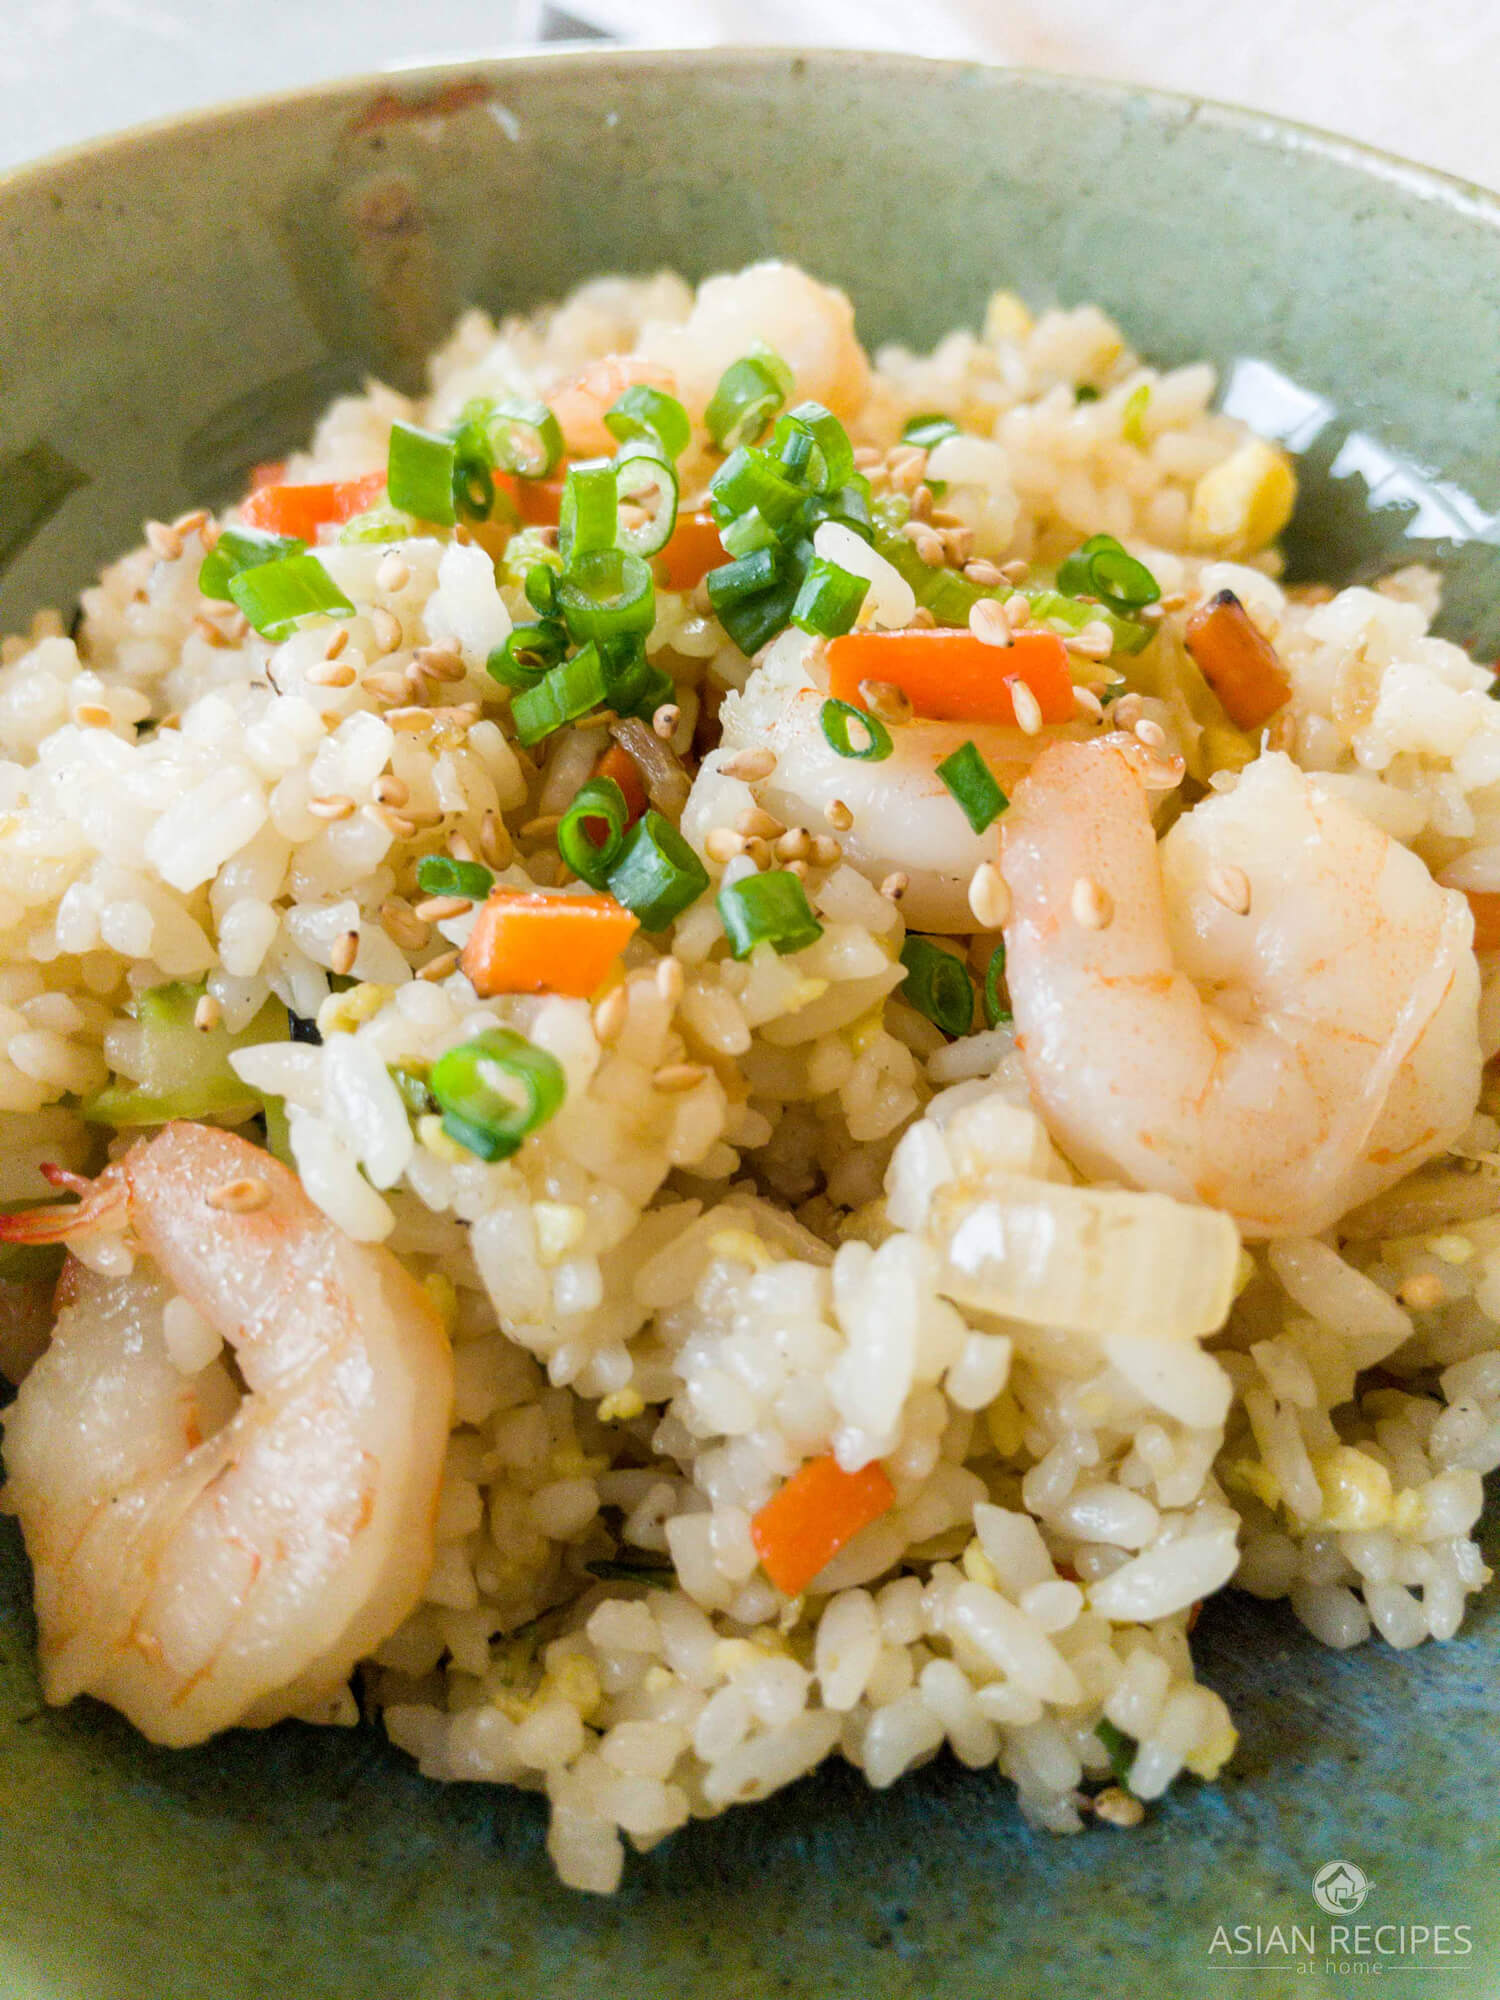 A super easy shrimp fried rice that tastes great. The whole family is going to love this healthier and homemade shrimp fried rice.